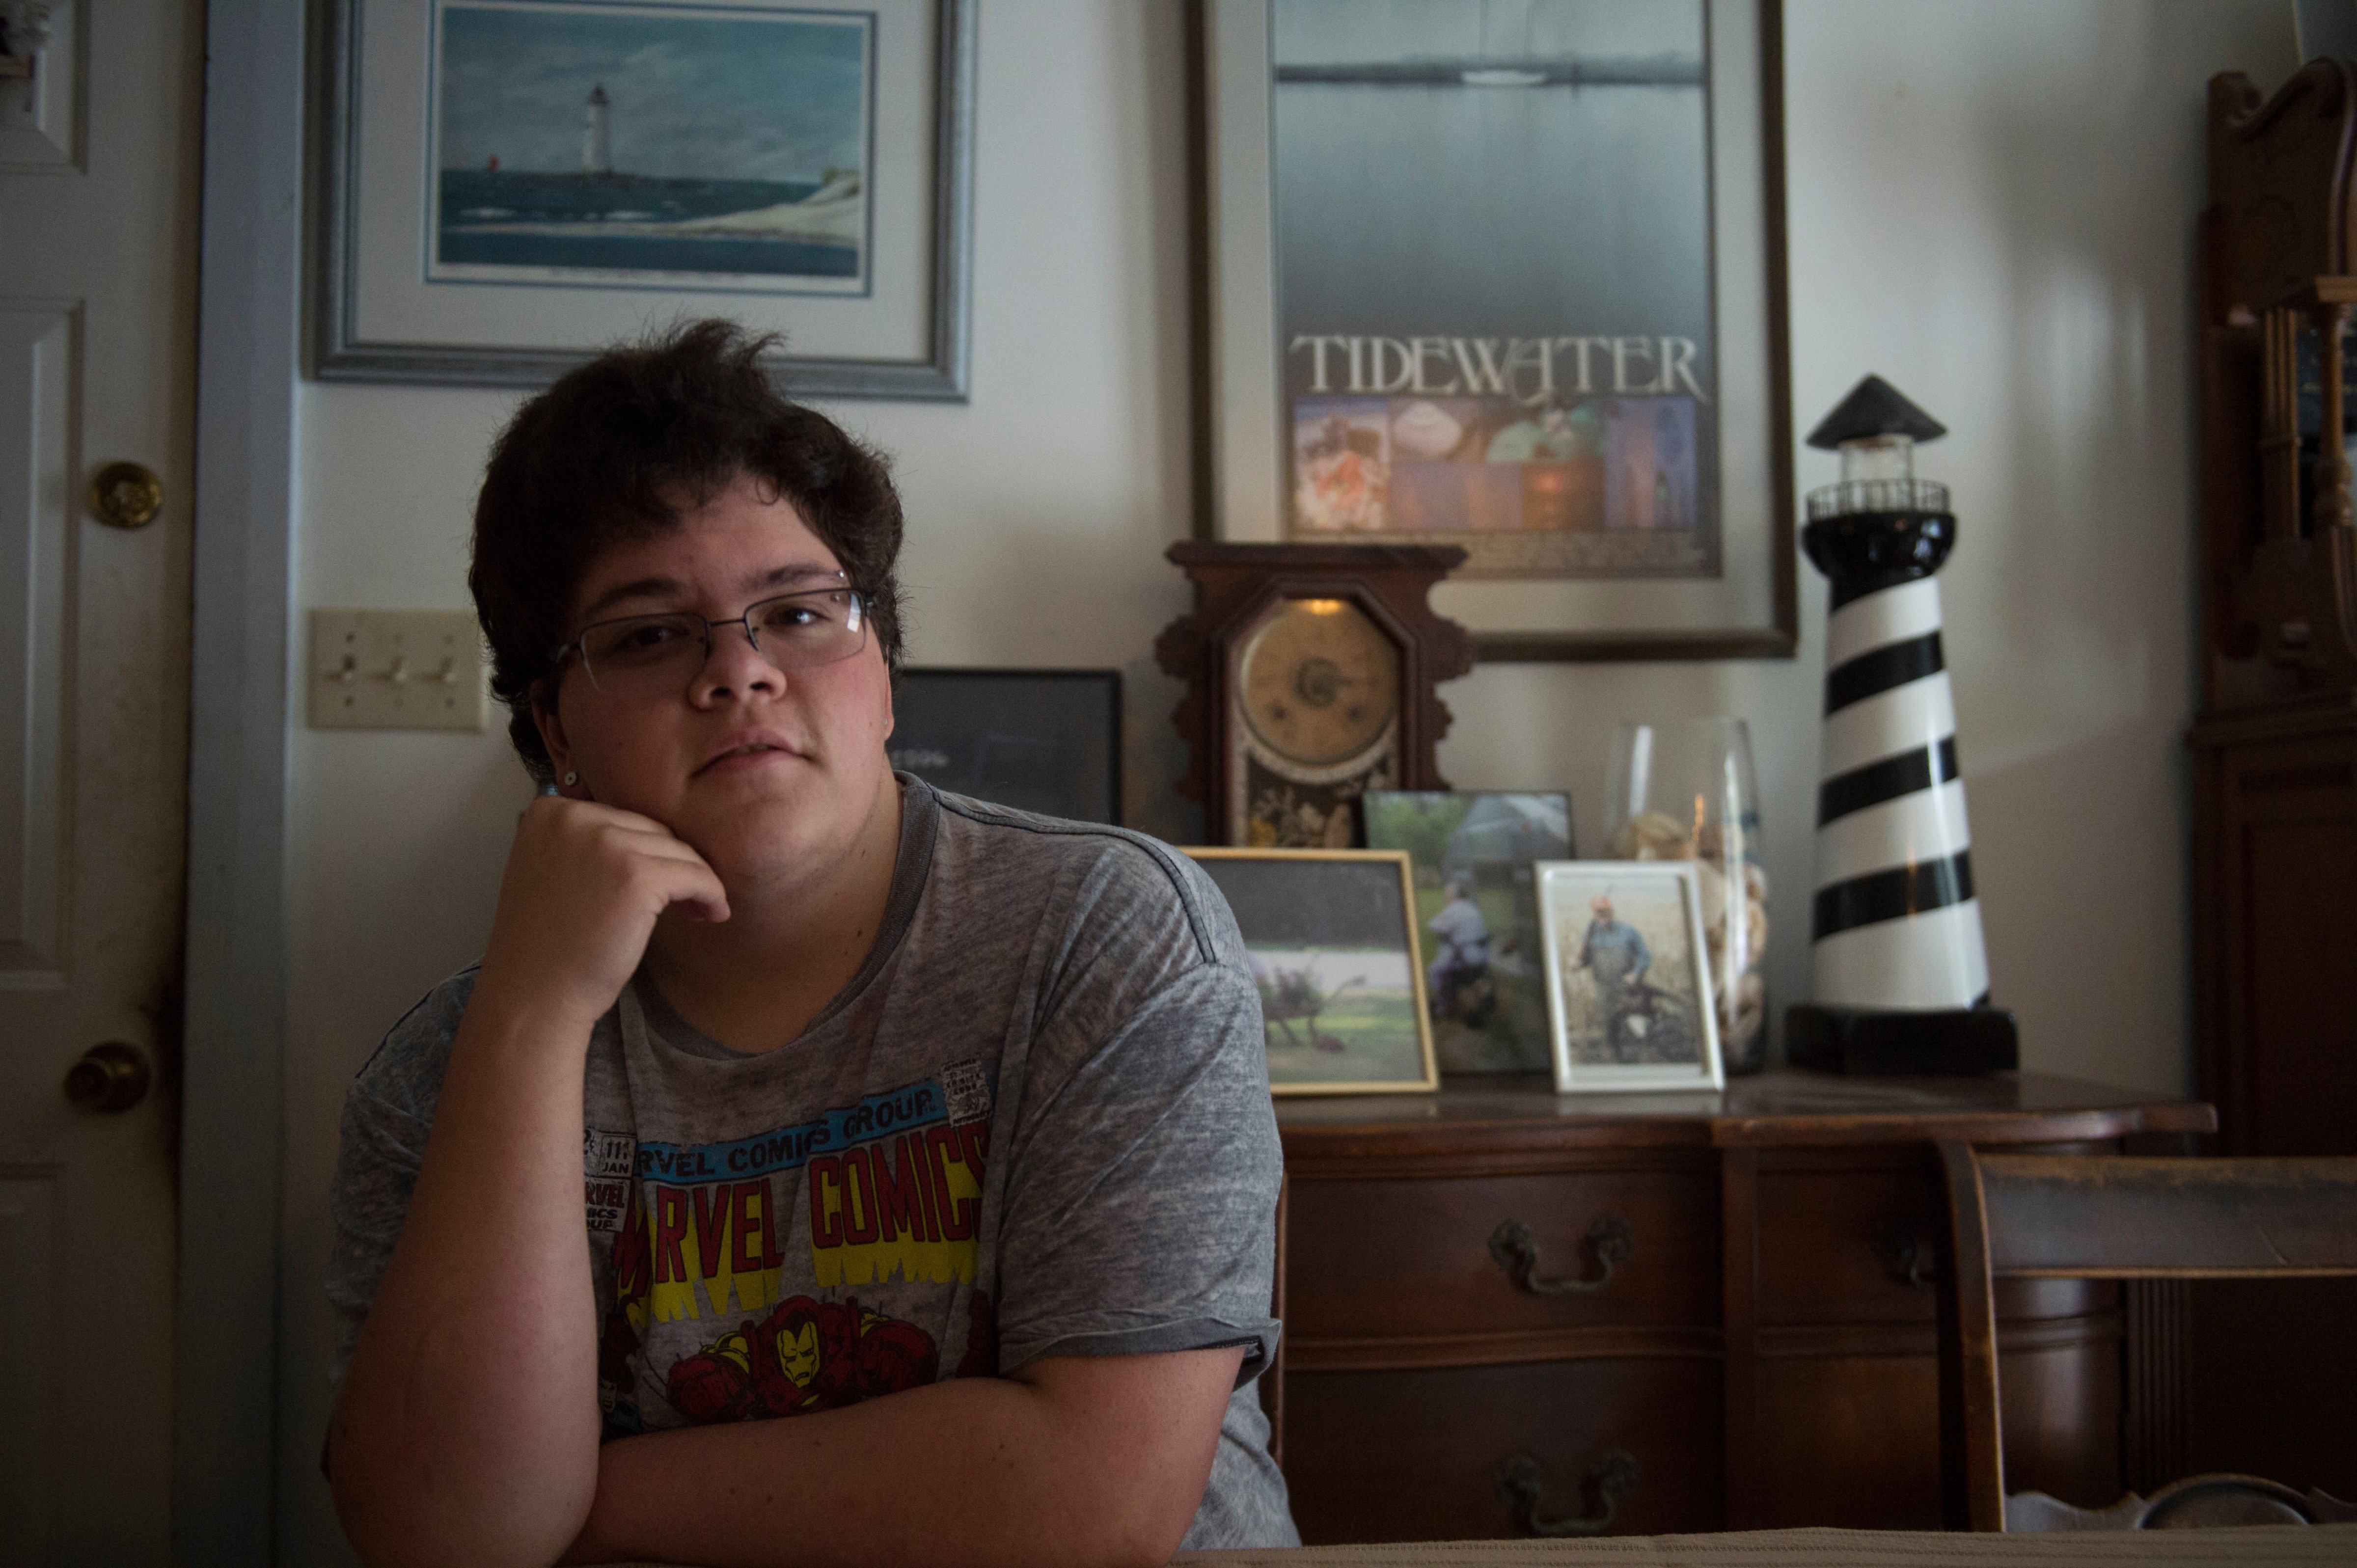 Gavin Grimm, 17, at his home in Gloucester, Va., on Aug. 21, 2016. The transgender teen sued the Gloucester County School Board after it barred him from the boys' bathroom (Nikki Kahn—The Washington Post/Getty Images)